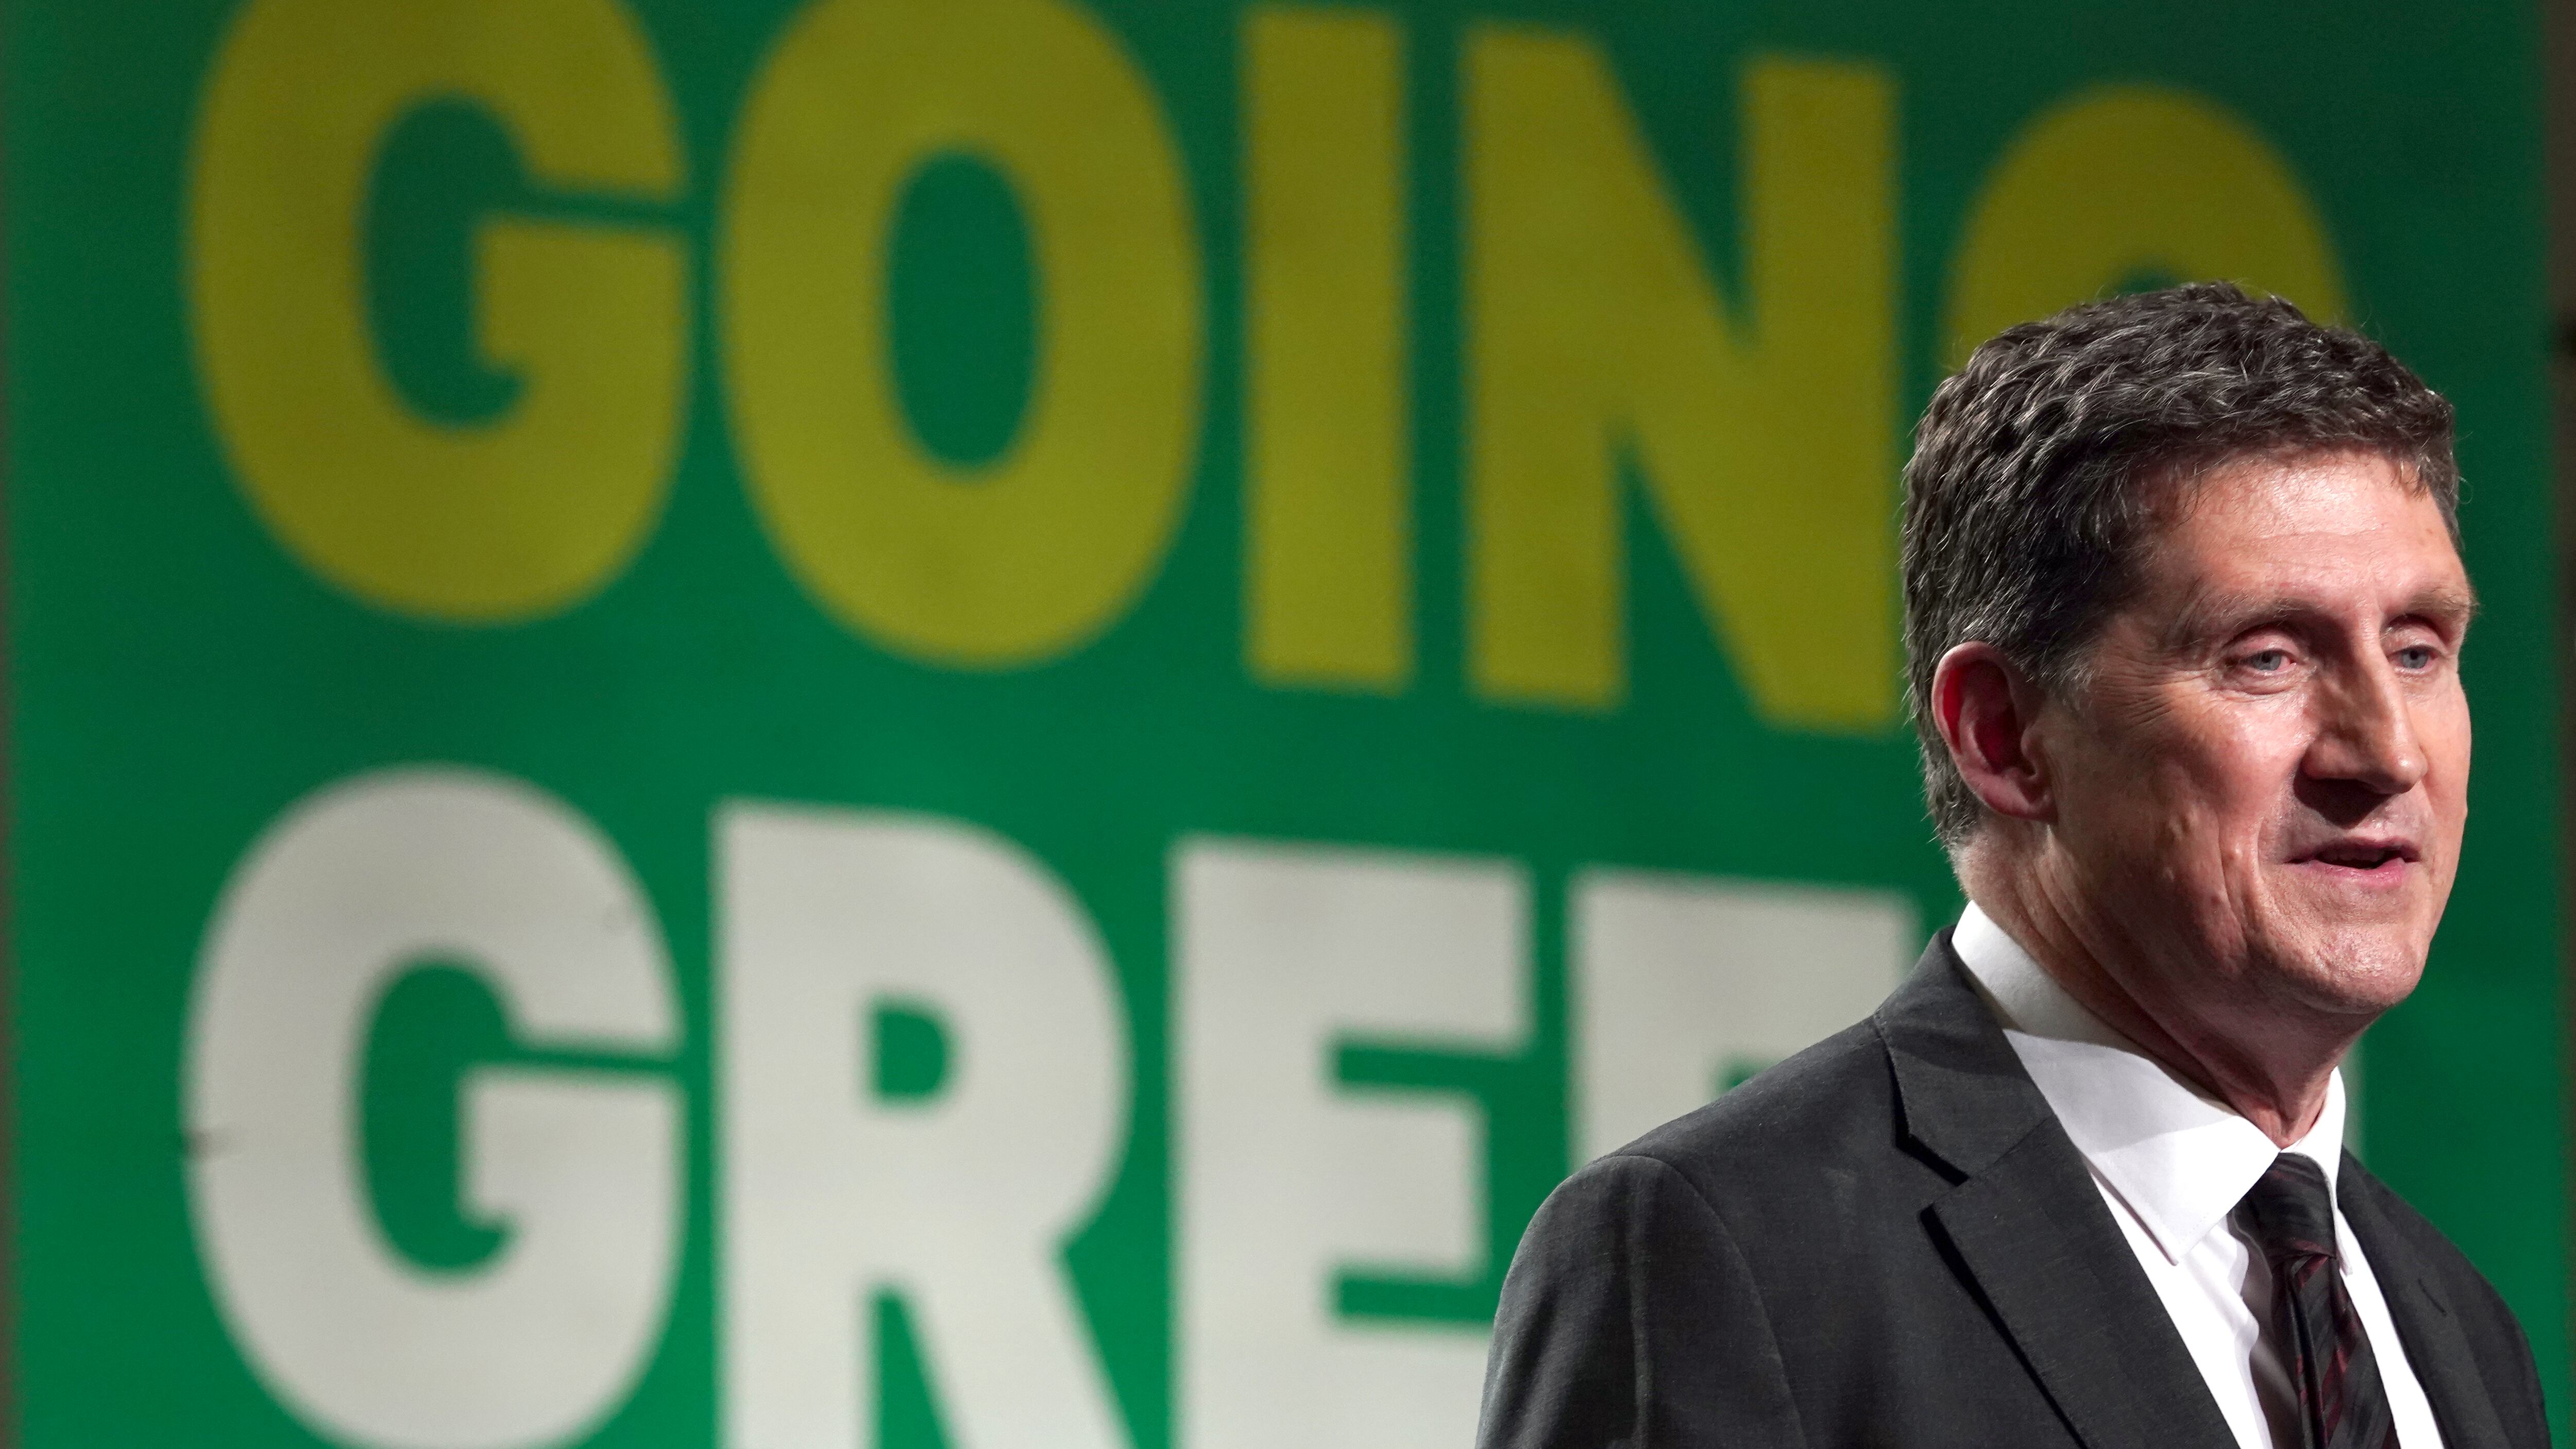 Eamon Ryan announced last week he is stepping down as leader of the Green Party